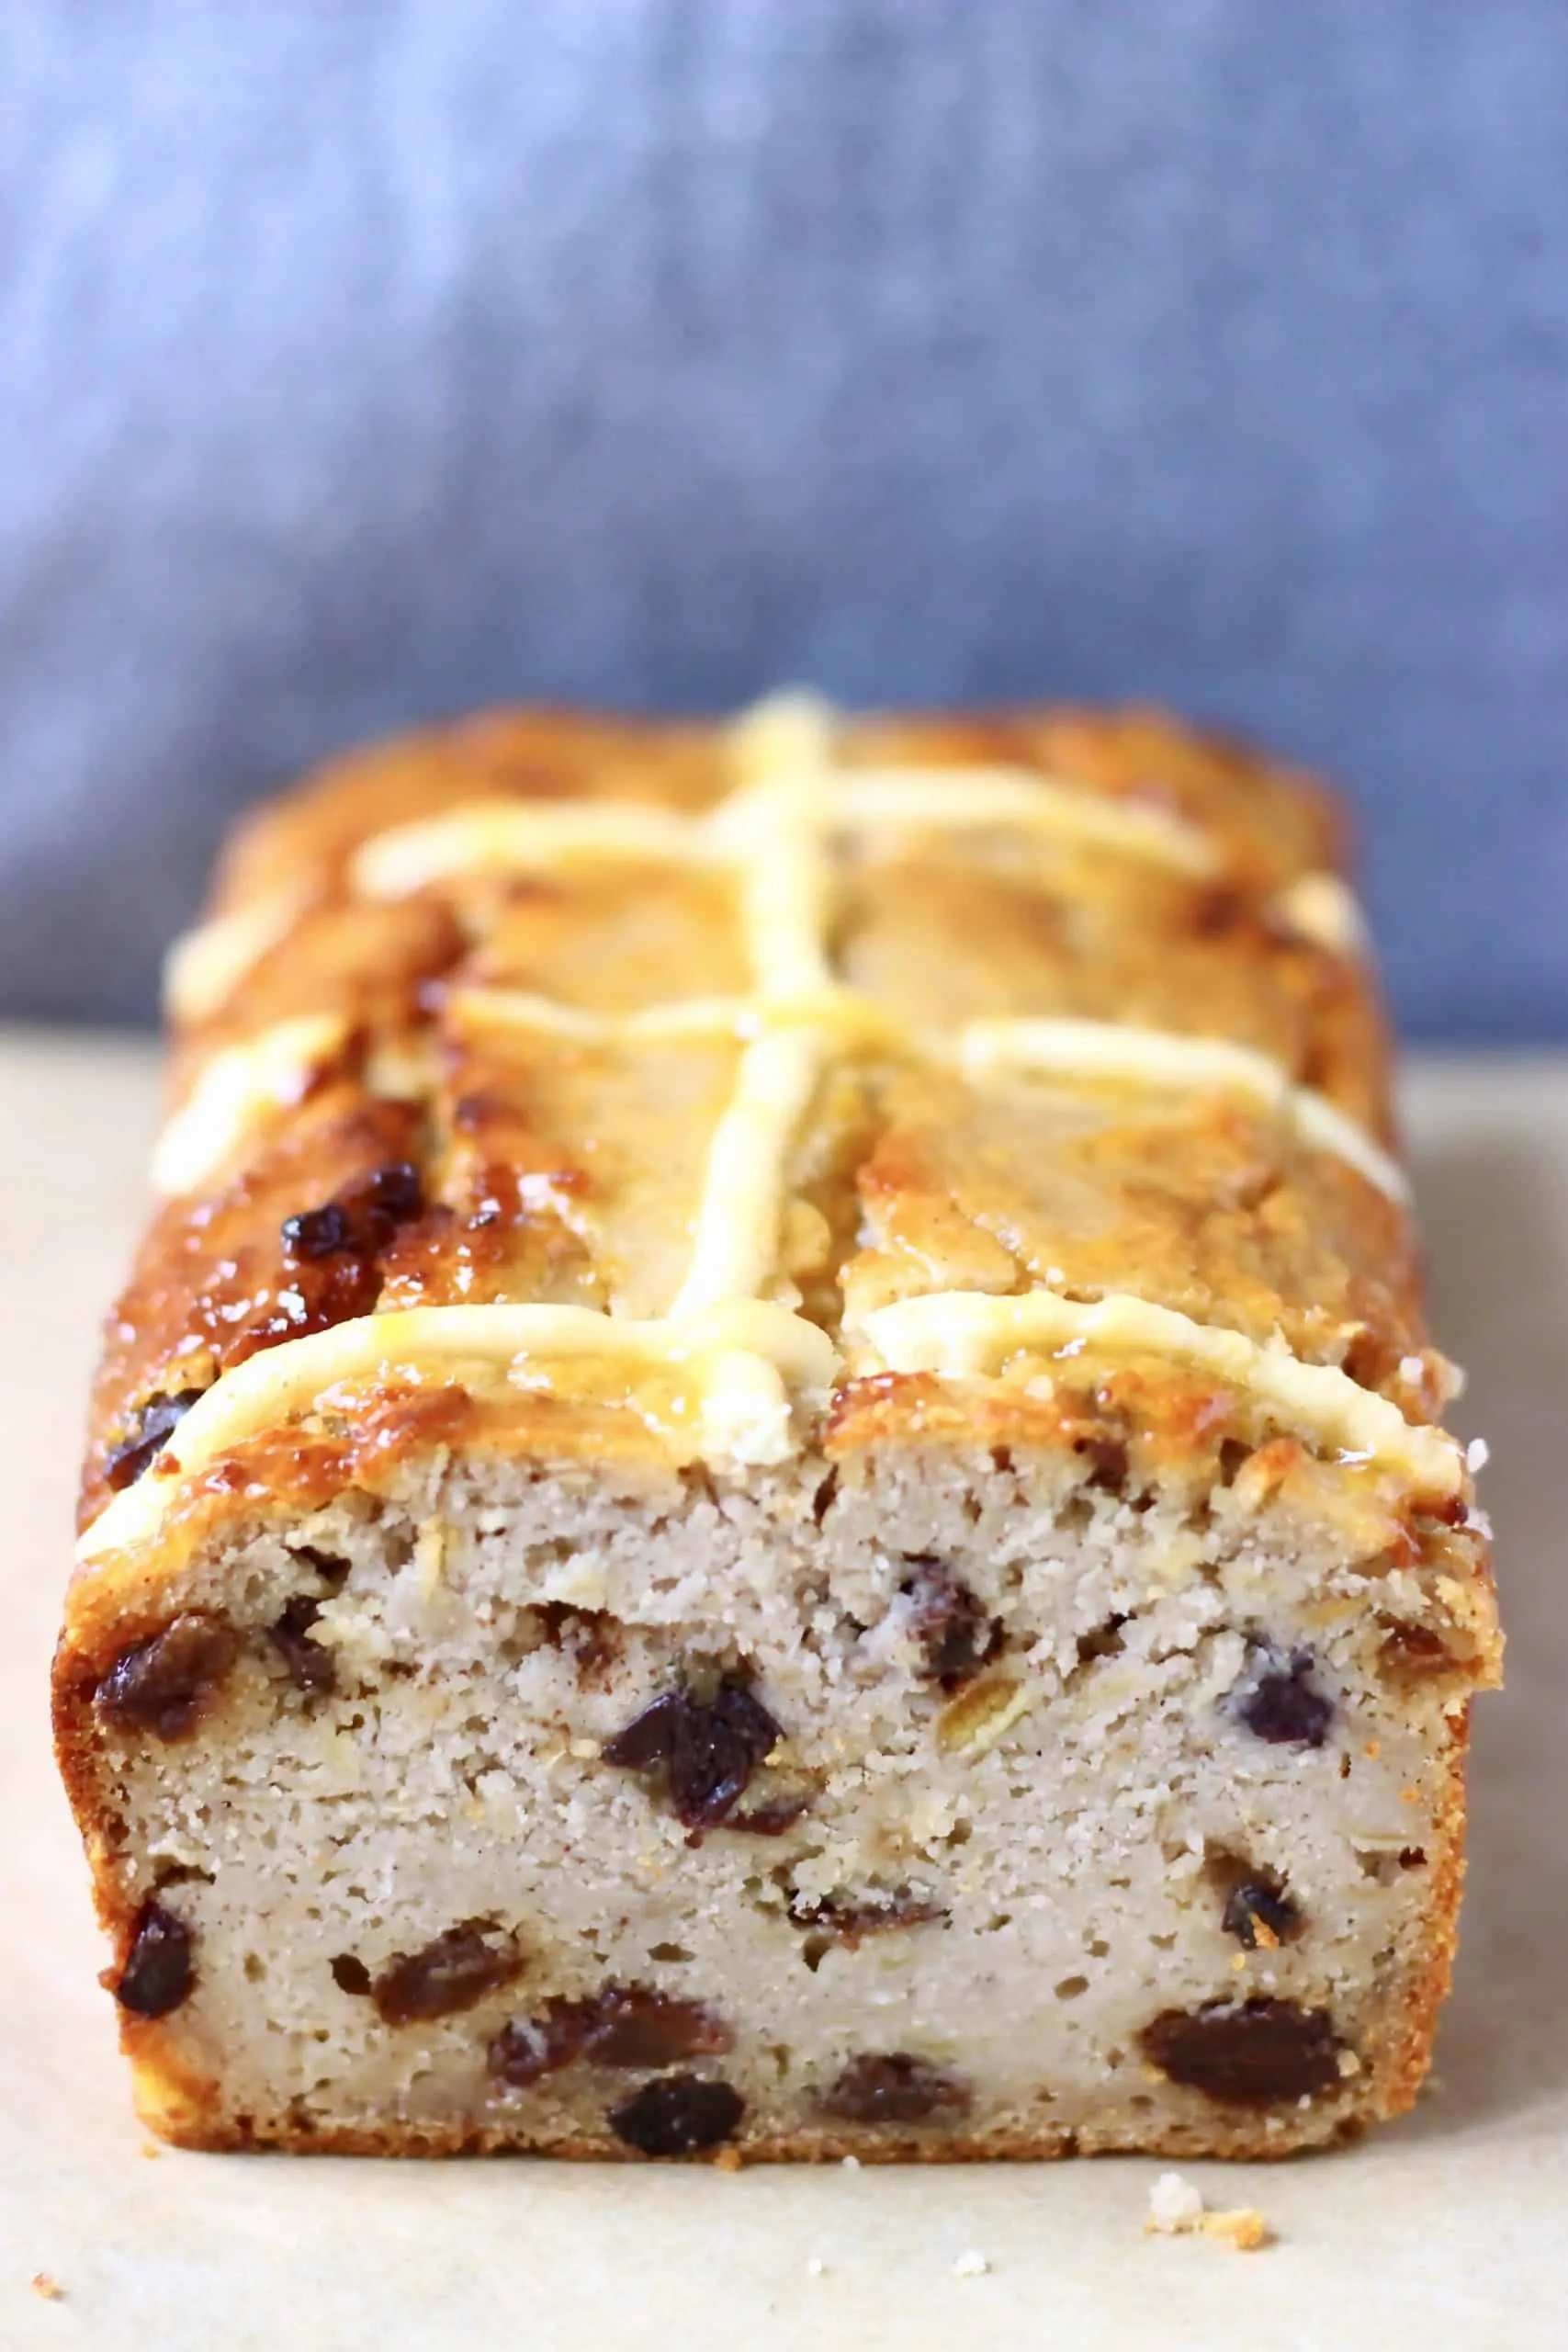 Hot cross bun loaf on a sheet of brown baking paper against a grey background